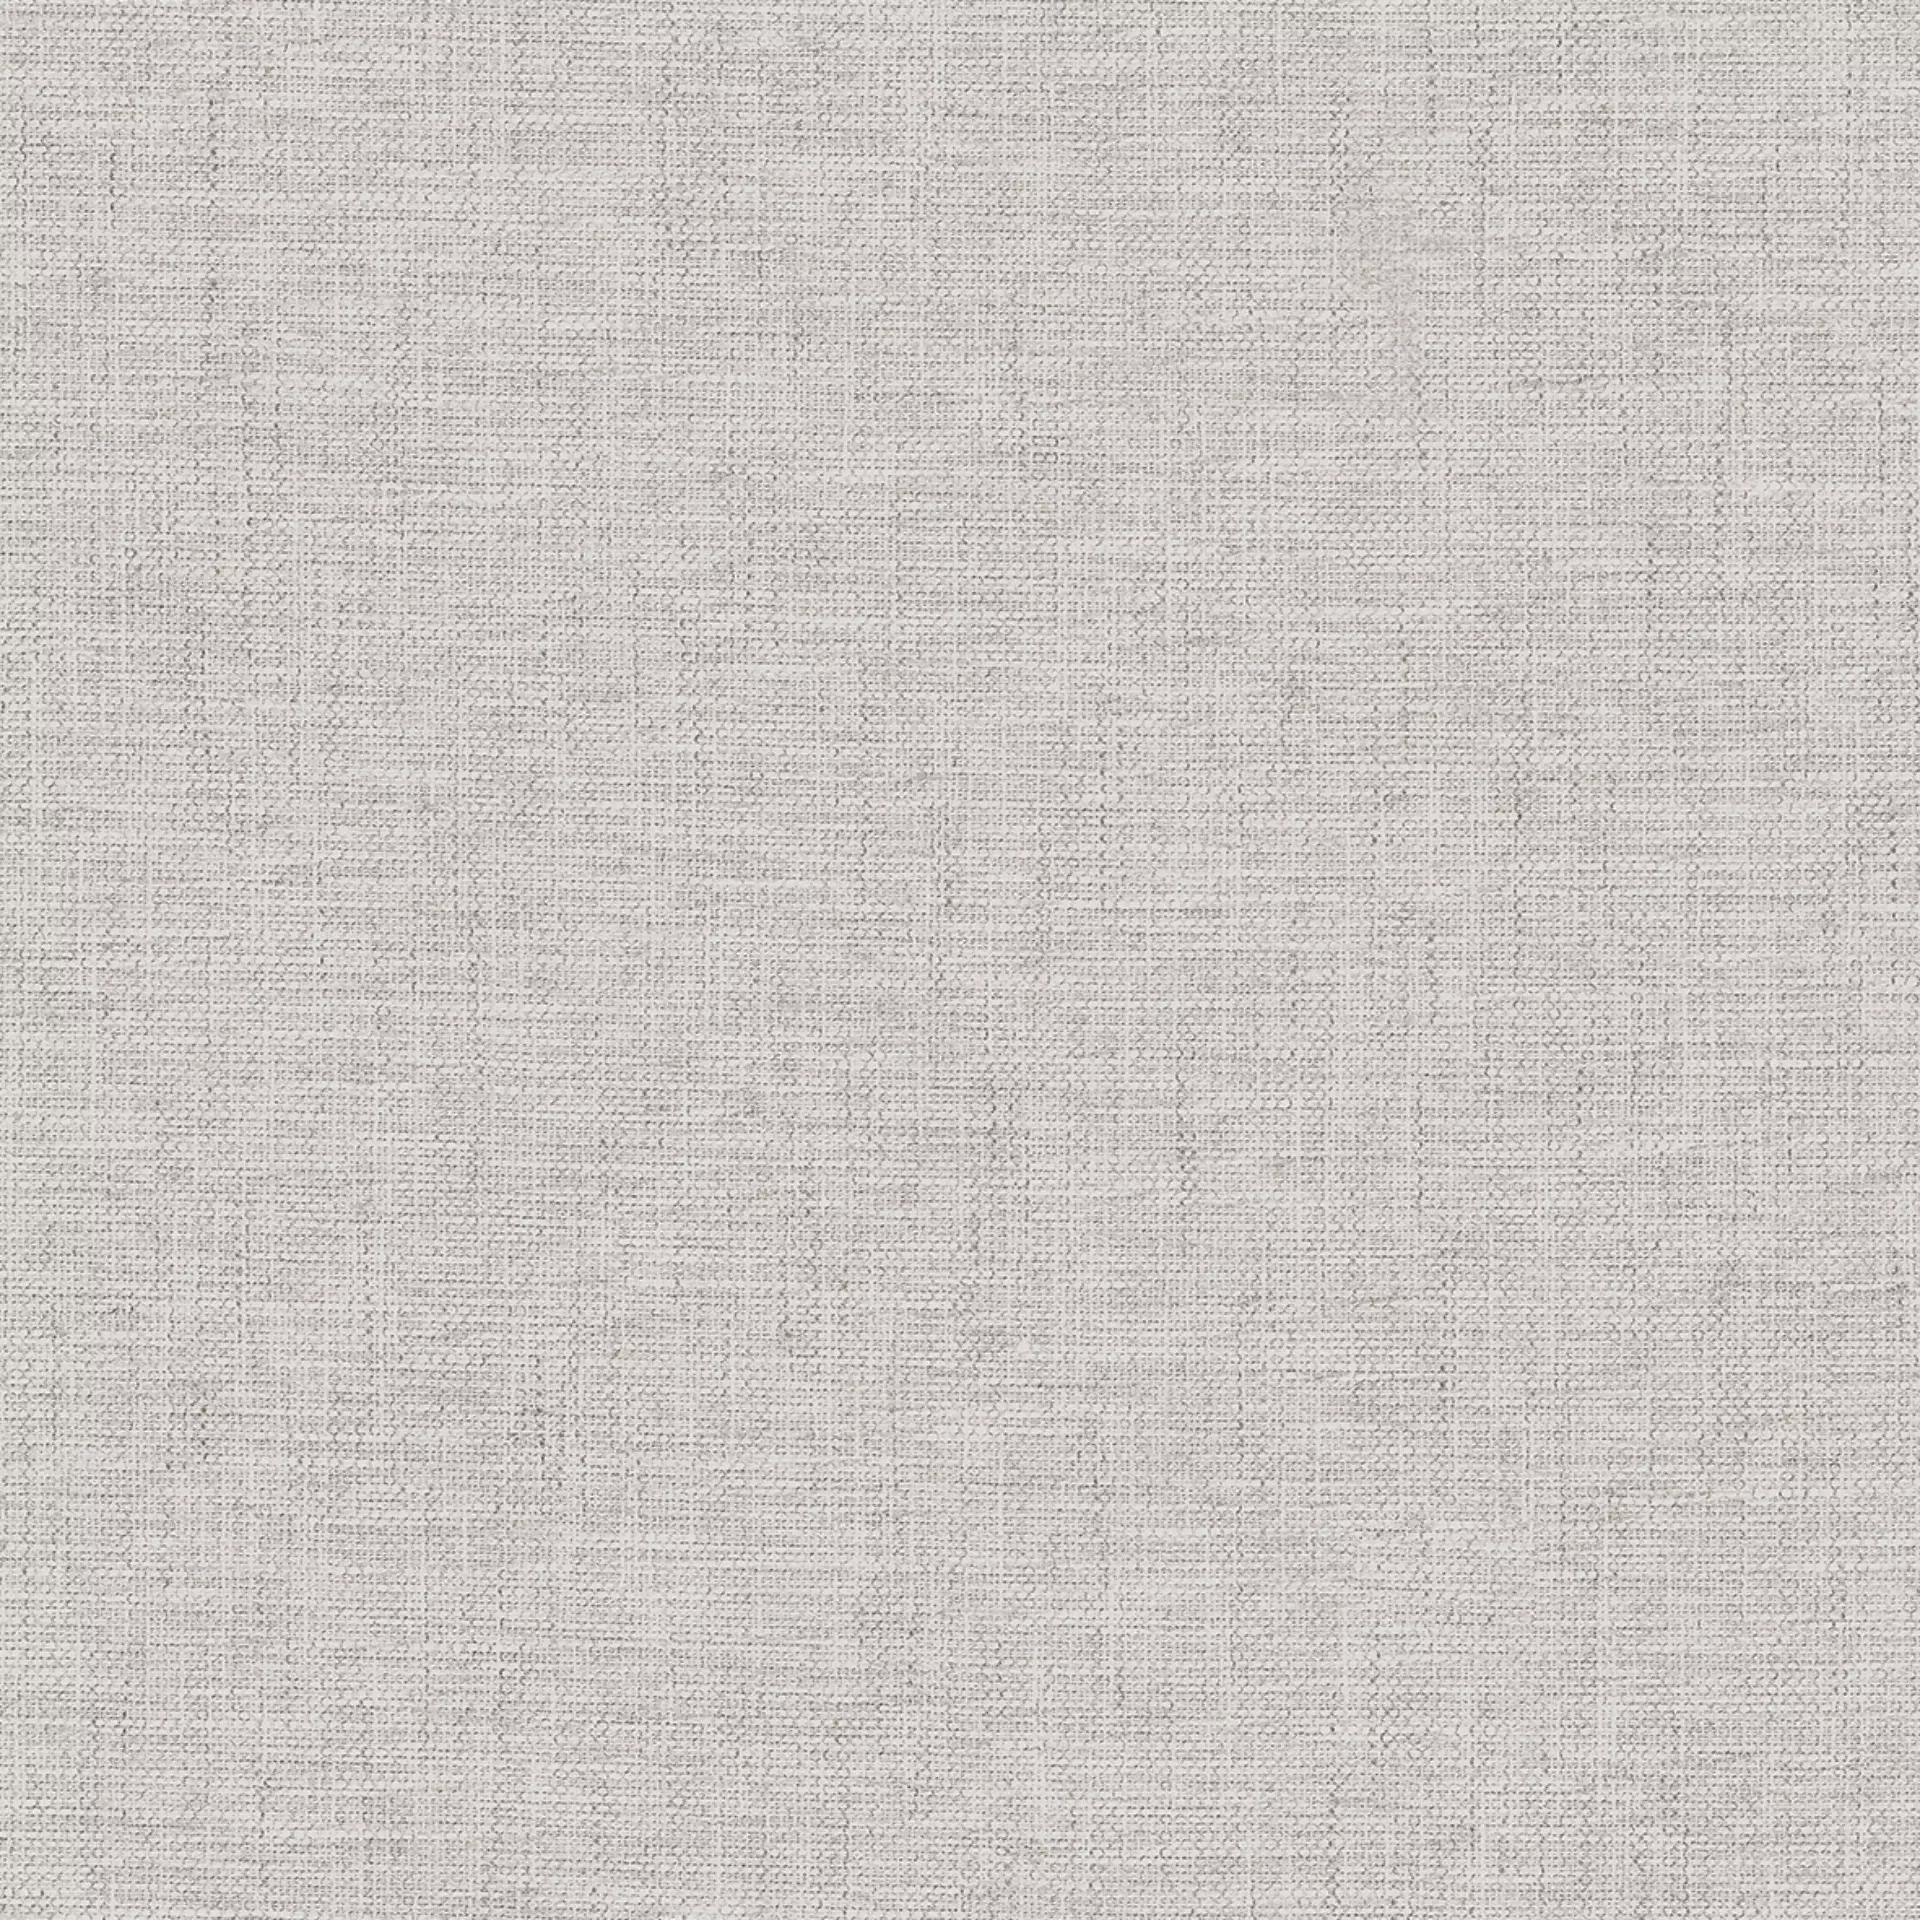 Sant Agostino Fineart White Natural CSAFI7WH60 60x60cm rectified 10mm